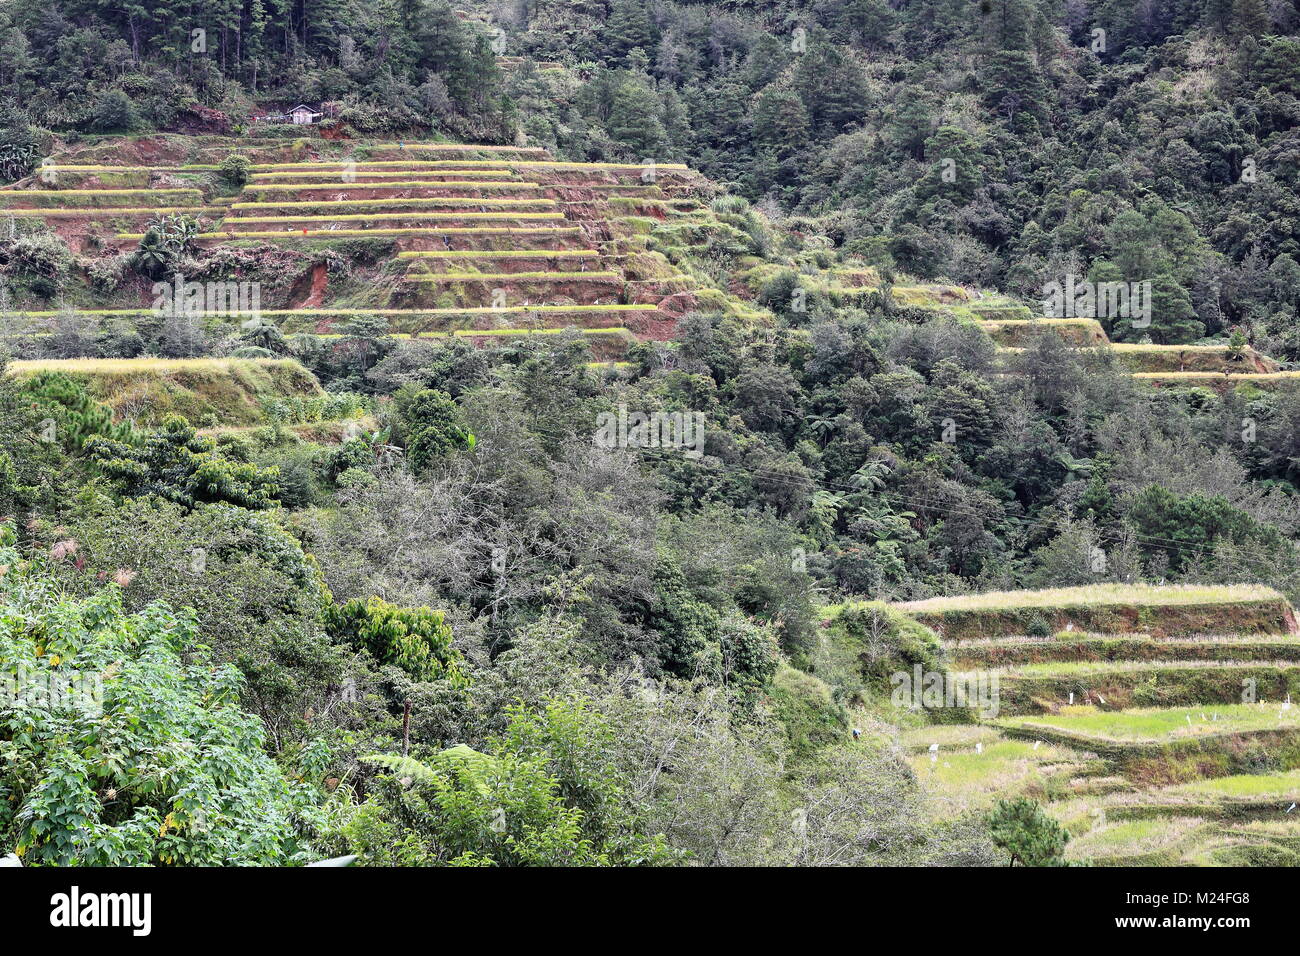 The Banaue village cluster-part of the Rice Terraces of the Philippine Cordilleras-masterpiece of the local Igorot people seen from the main viewpoint Stock Photo